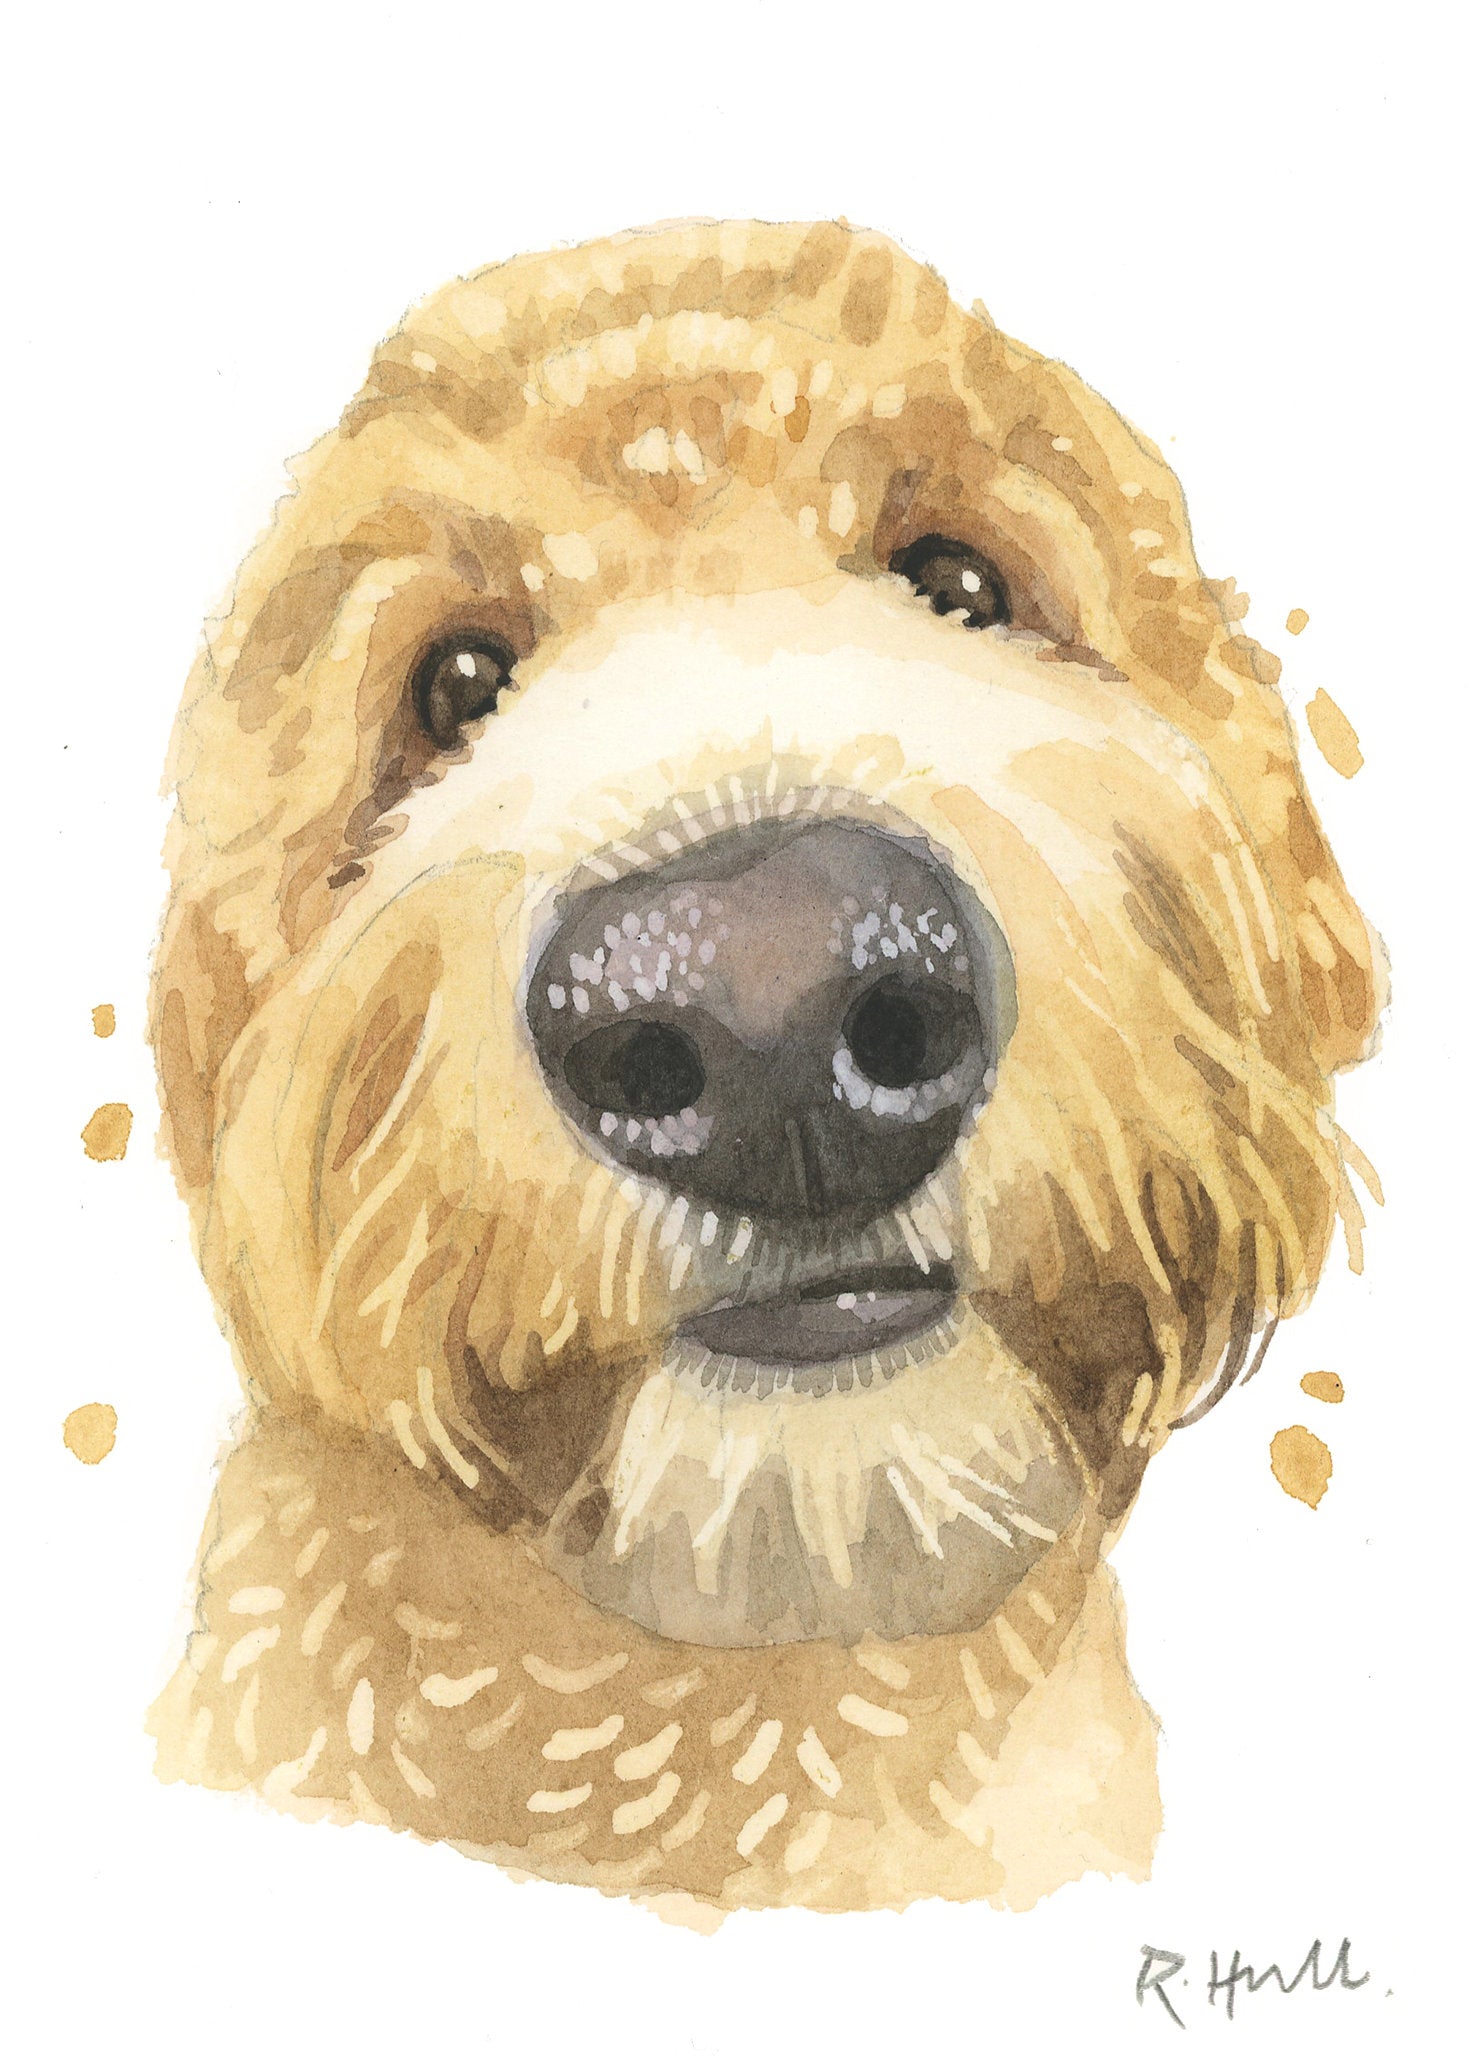 Golden Doodle All Occasion Card, Cute Labradoodle Goldendoodle Greeting Cards